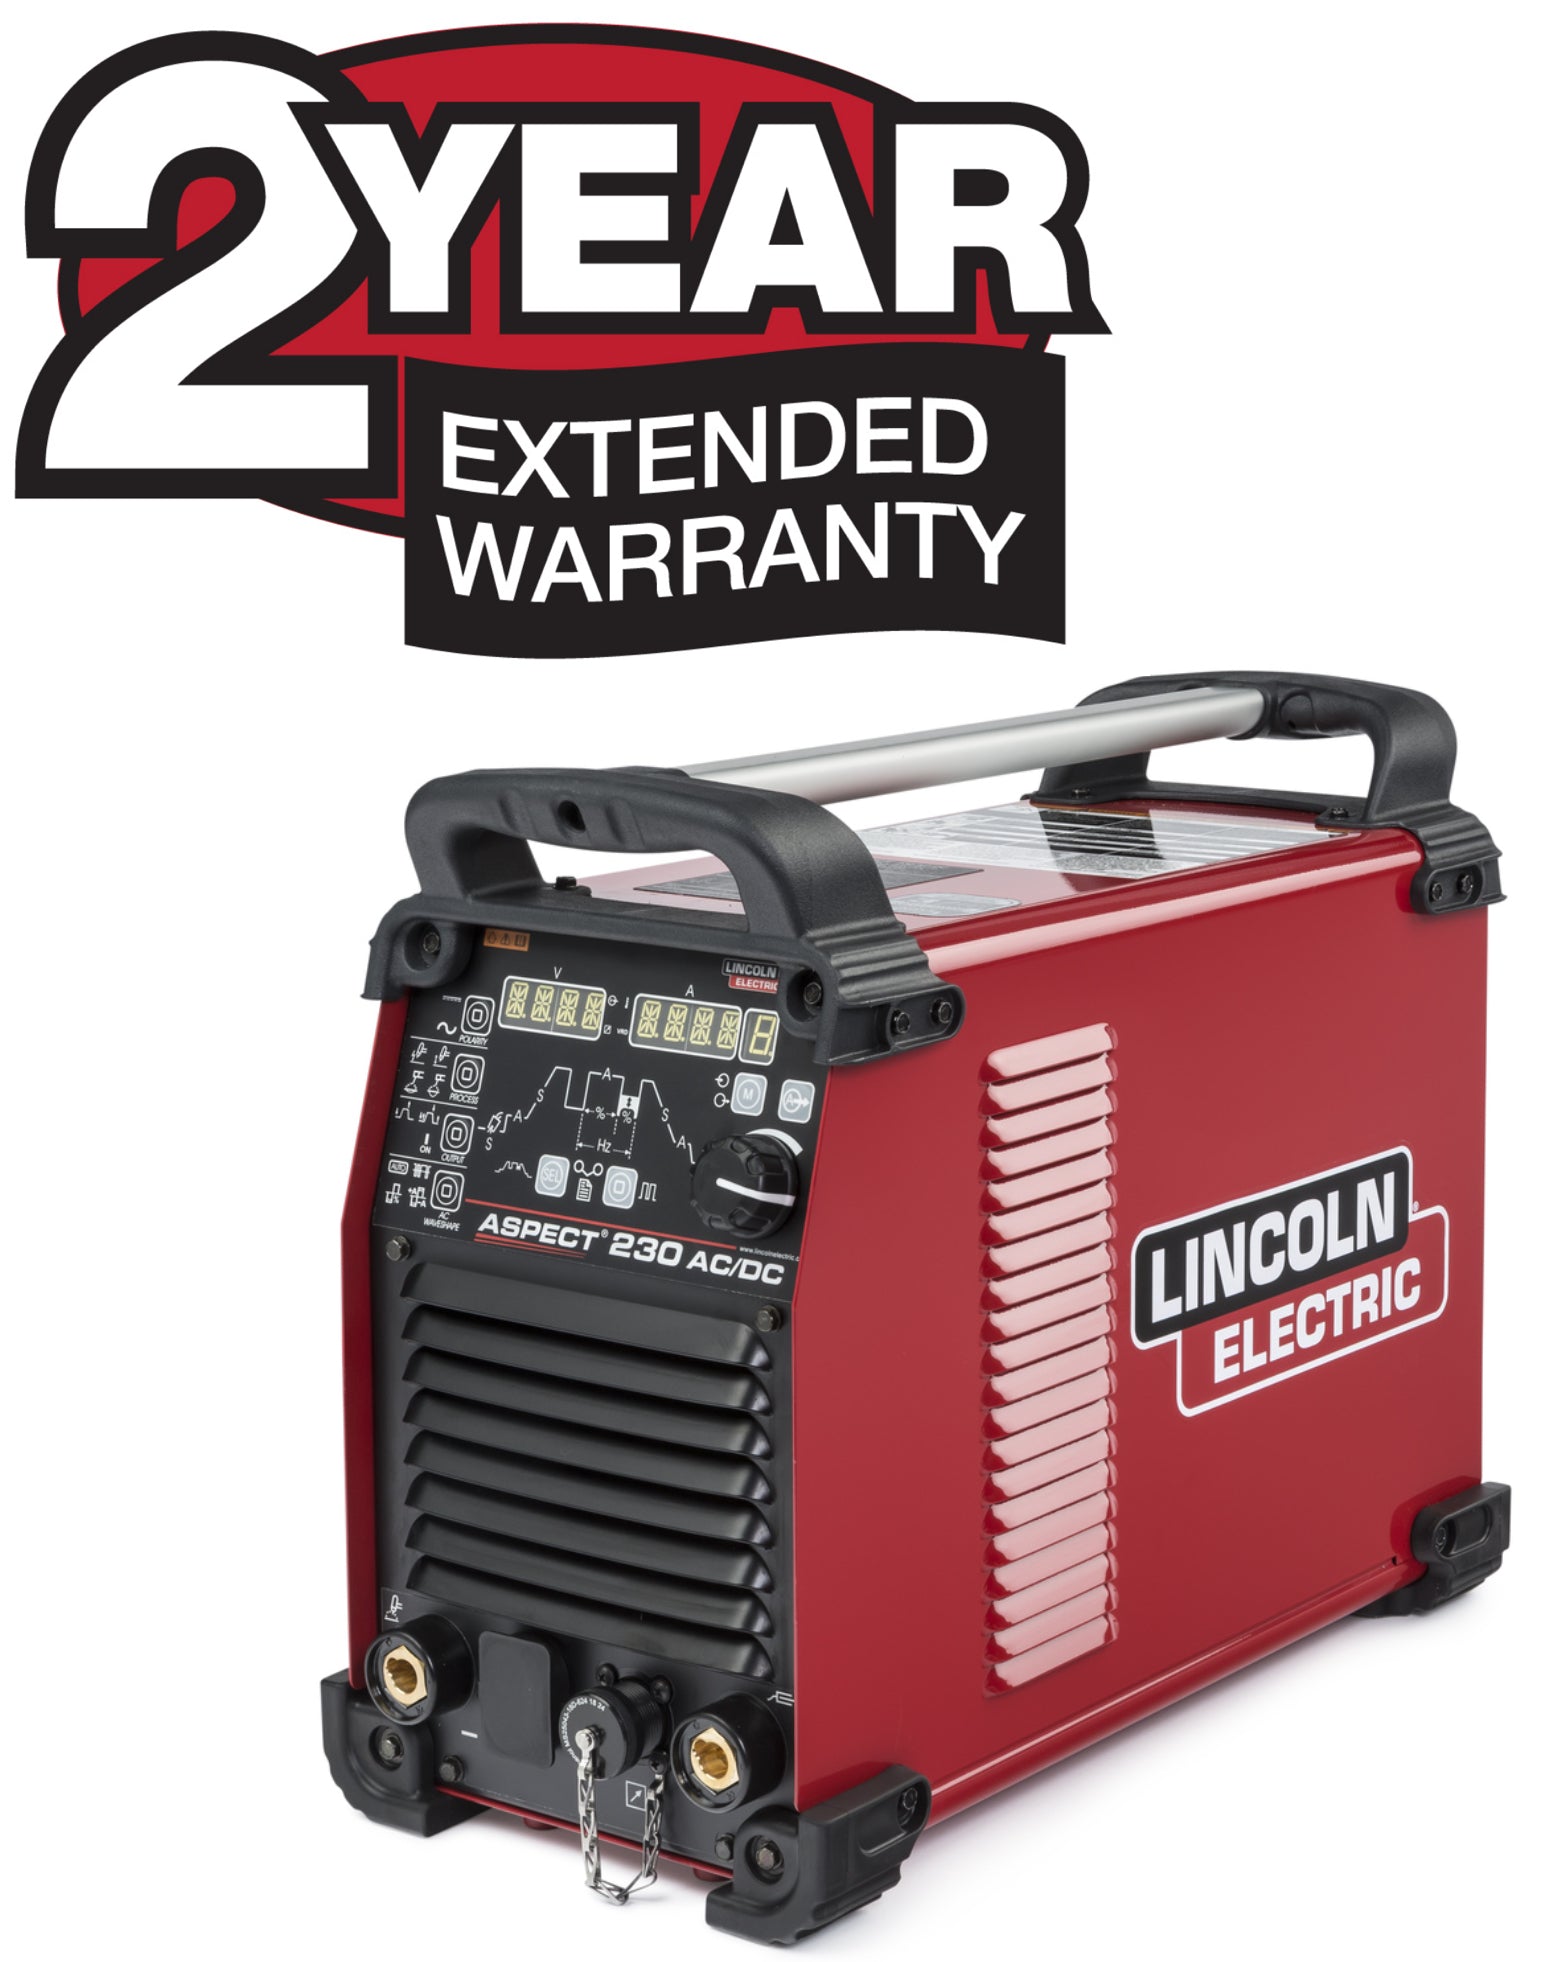 Lincoln 2-Year Extended Warranty - Aspect 230 AC/DC X4340